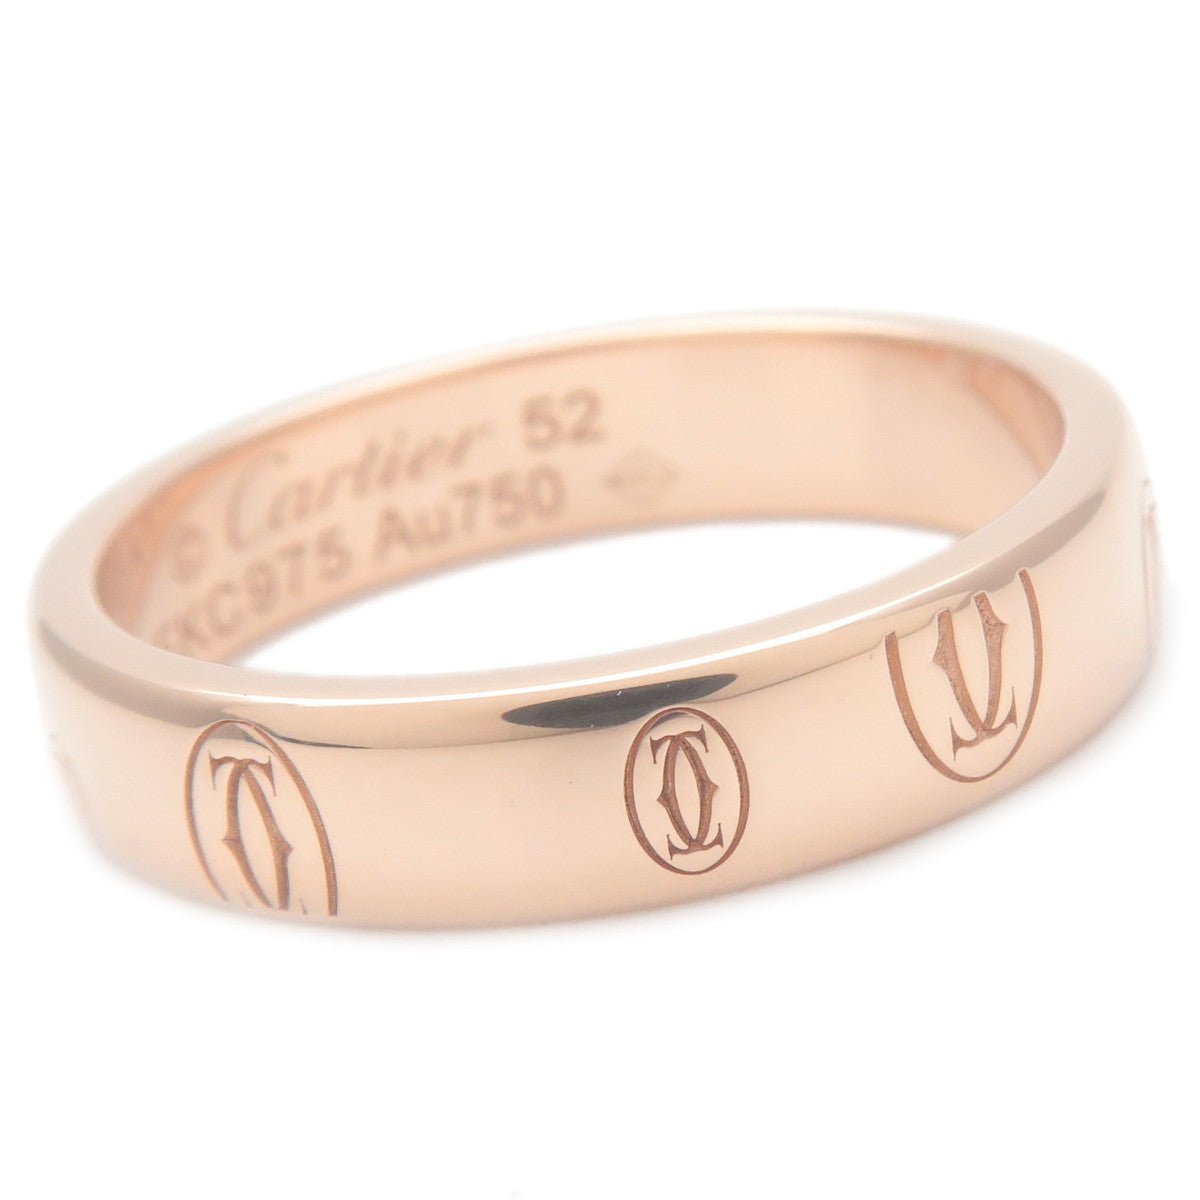 Cartier Happy Birth Day Ring Rose Gold #52 US6-6.5 HK13 EU52